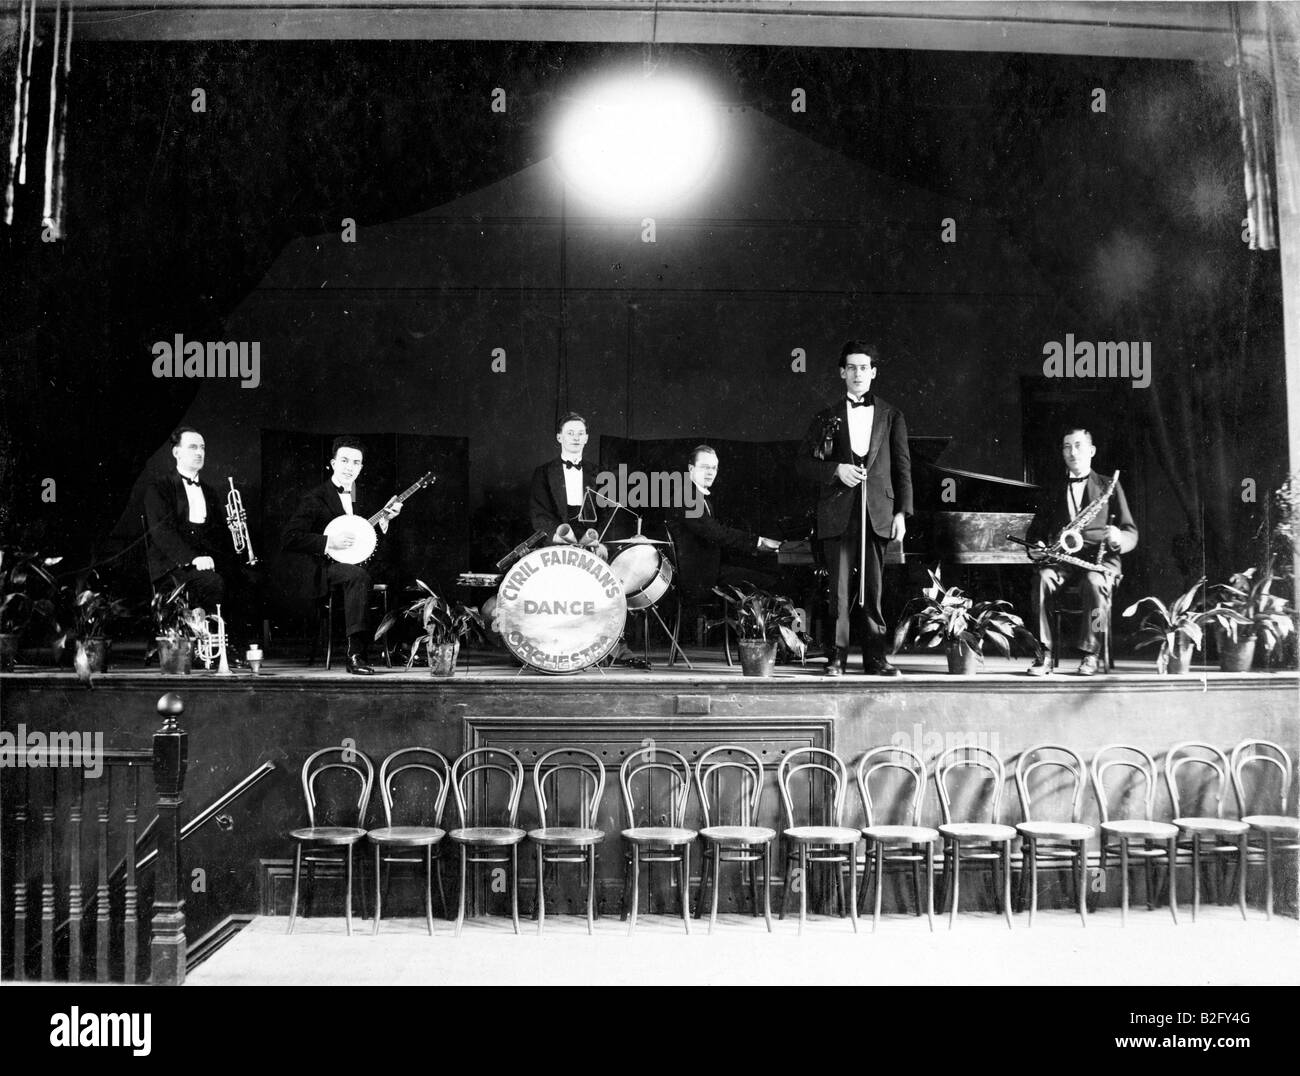 England, Croydon. Cyril Fairman dance band on stage, posing for formal photograph in 1920-1926. Jazz band, with violin, drums, sax and banjo. Stock Photo